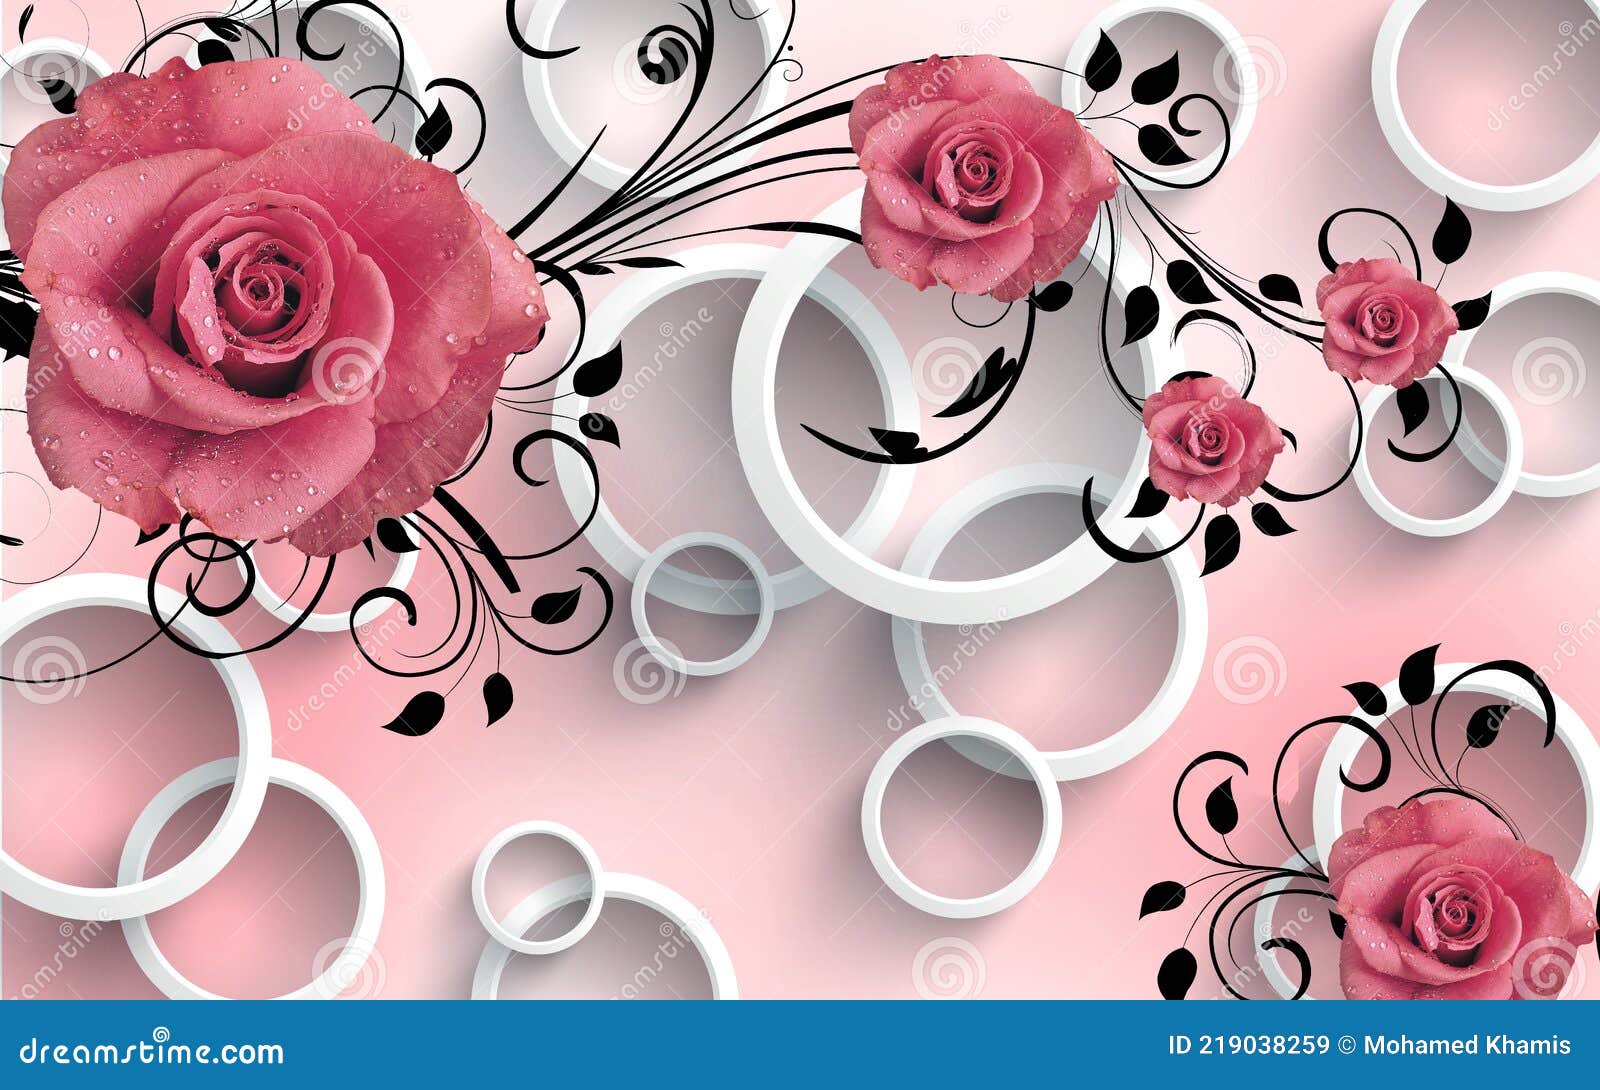 3d Wallpaper Red Flowers with Black Branches and White Circles on a Pink  Background Stock Image - Image of home, background: 219038259